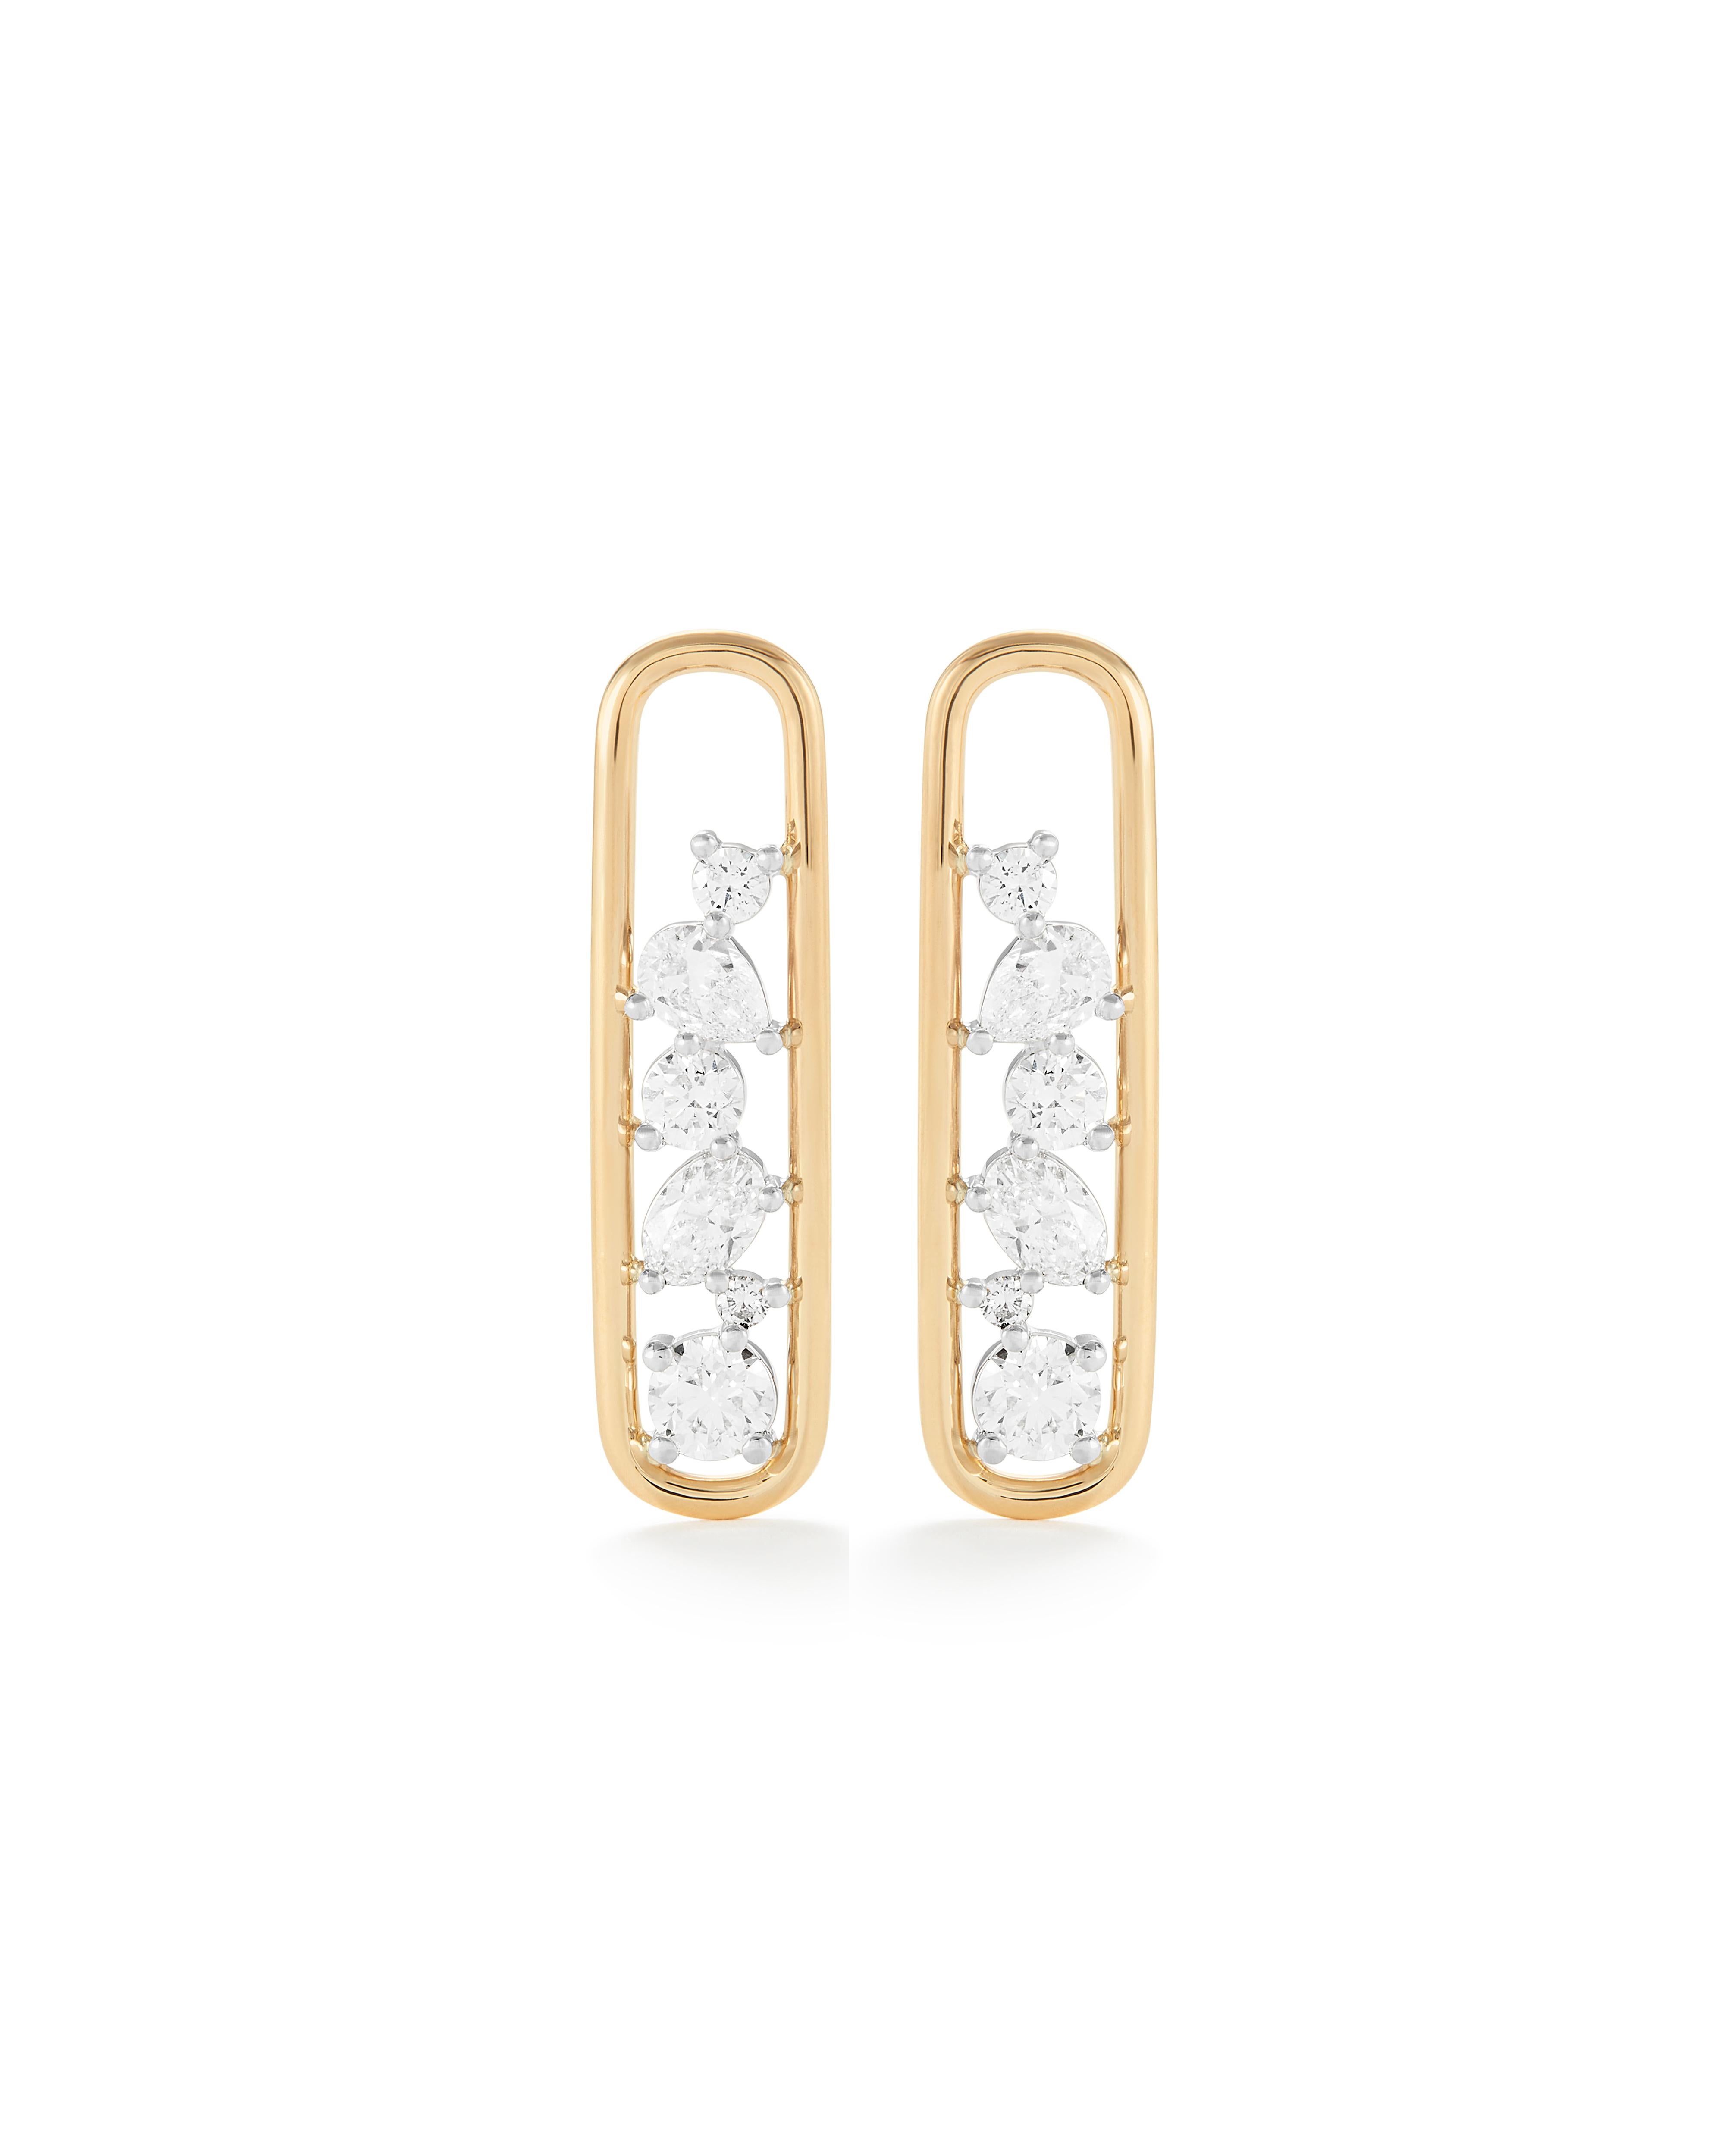 Dreamy drop earrings that will elevate any outfit! They are meticulously handcrafted in 18K solid gold with varying sized round, pear and oval shaped natural diamonds set in platinum. 

The Mara Collection was built around the beauty of negative